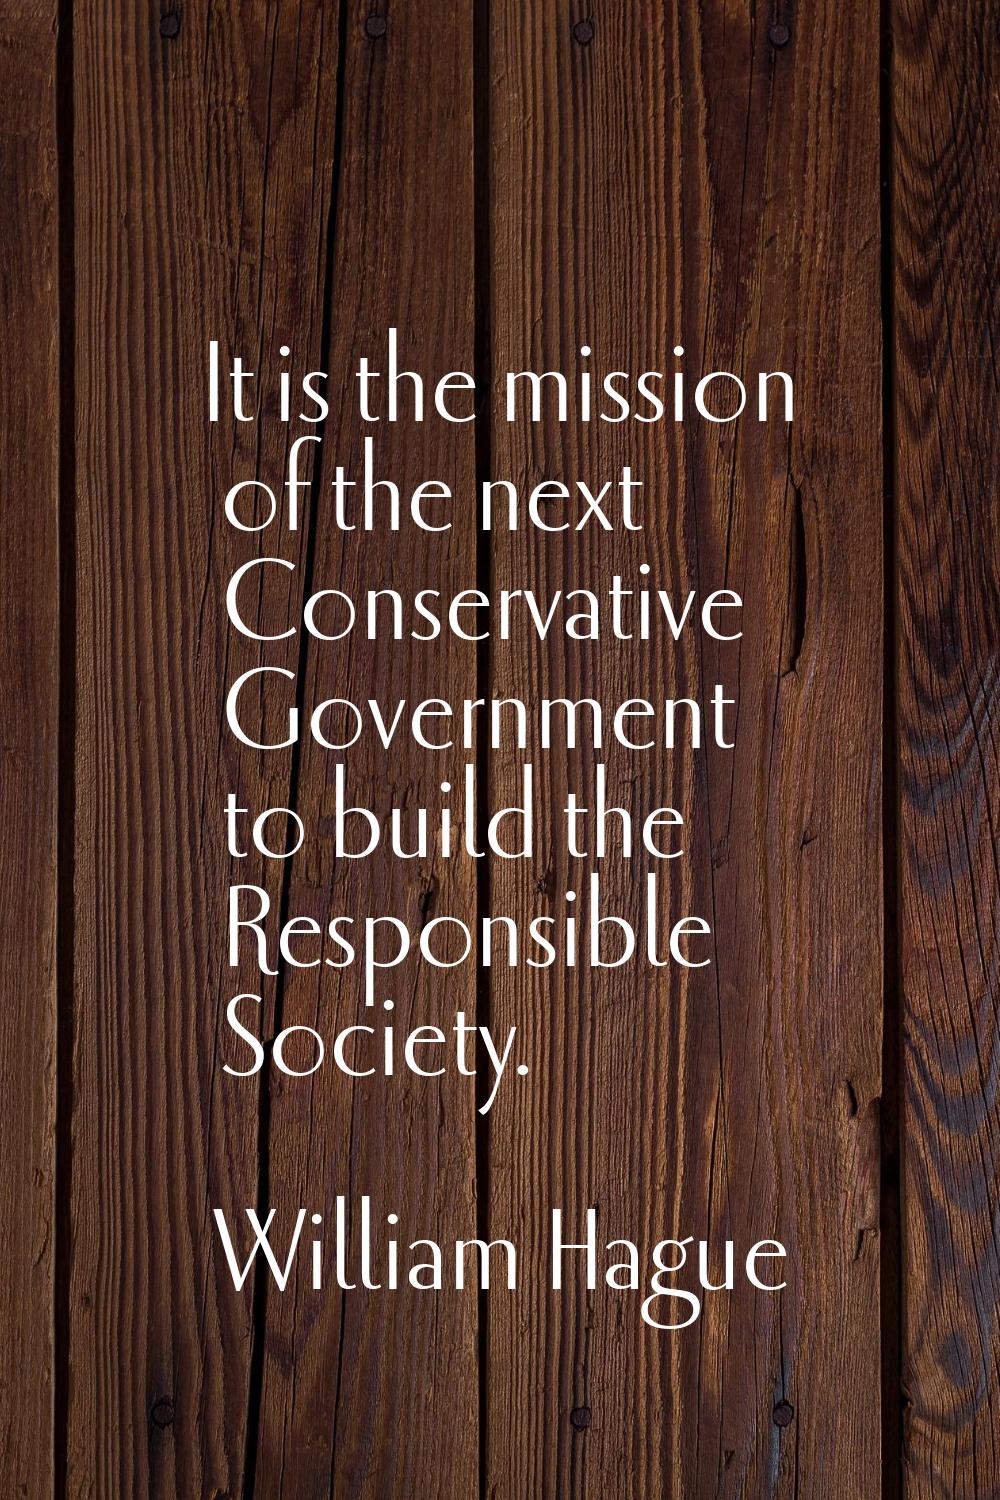 It is the mission of the next Conservative Government to build the Responsible Society.